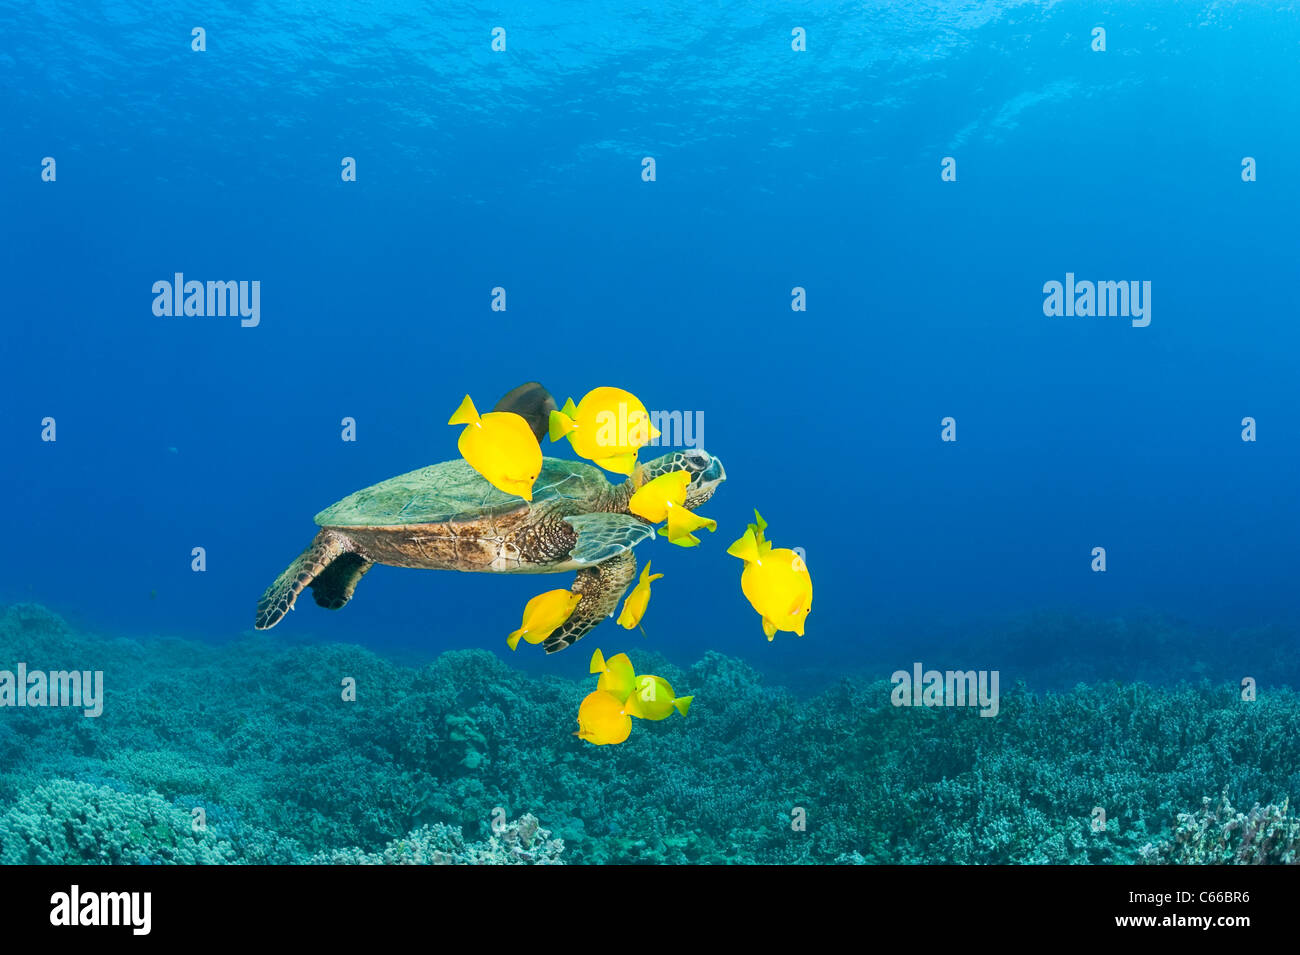 green sea turtle being cleaned of algae by yellow tang surgeonfish at cleaning station, Puako, Kona, Hawaii ( Pacific Ocean ) Stock Photo